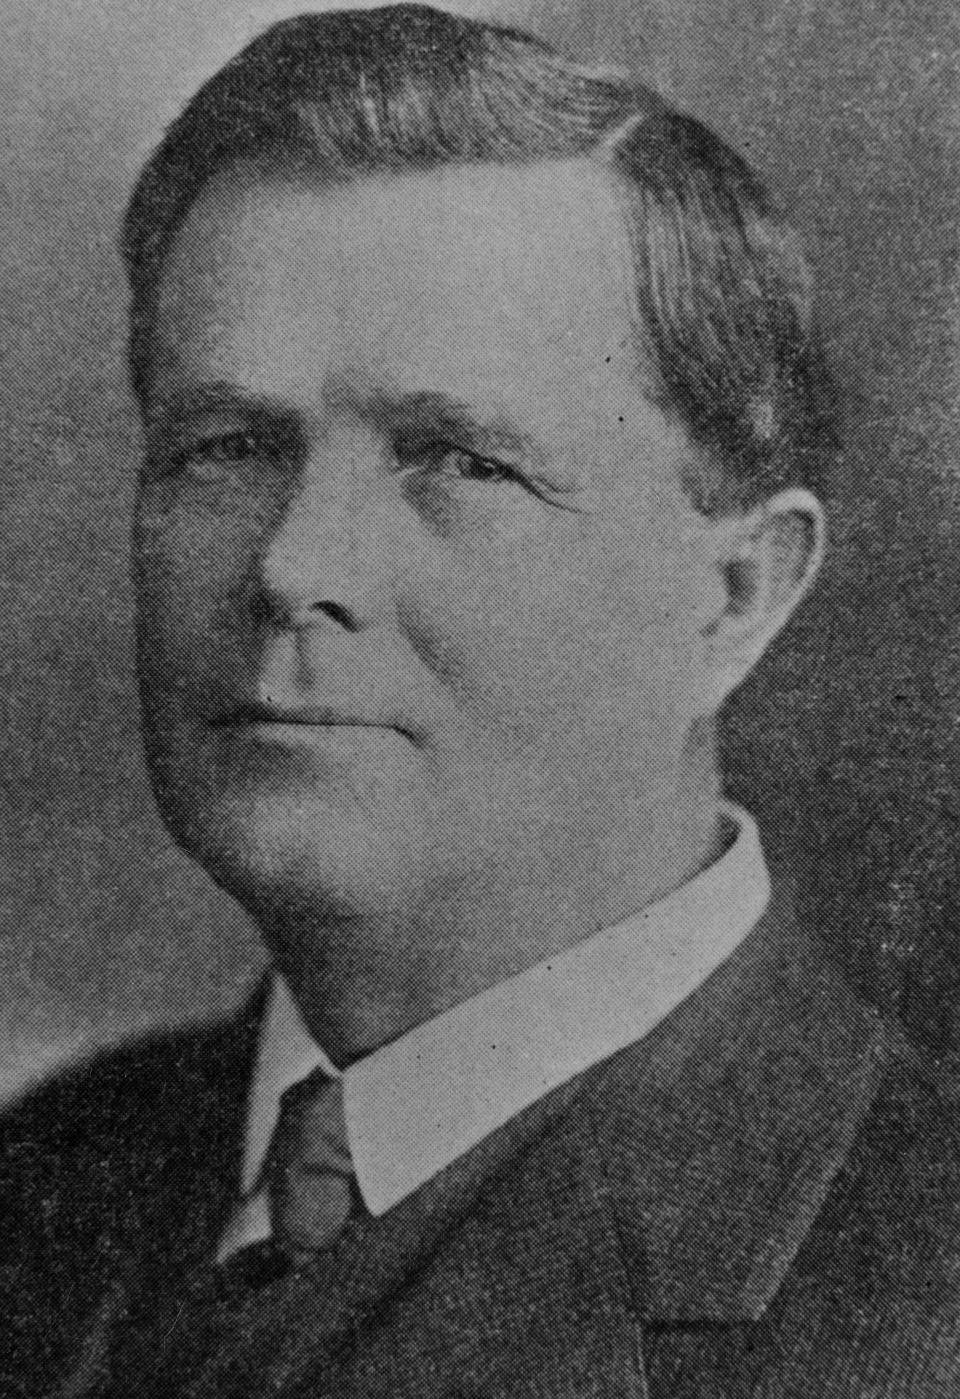 William H. Bledsoe, attorney for the defense.